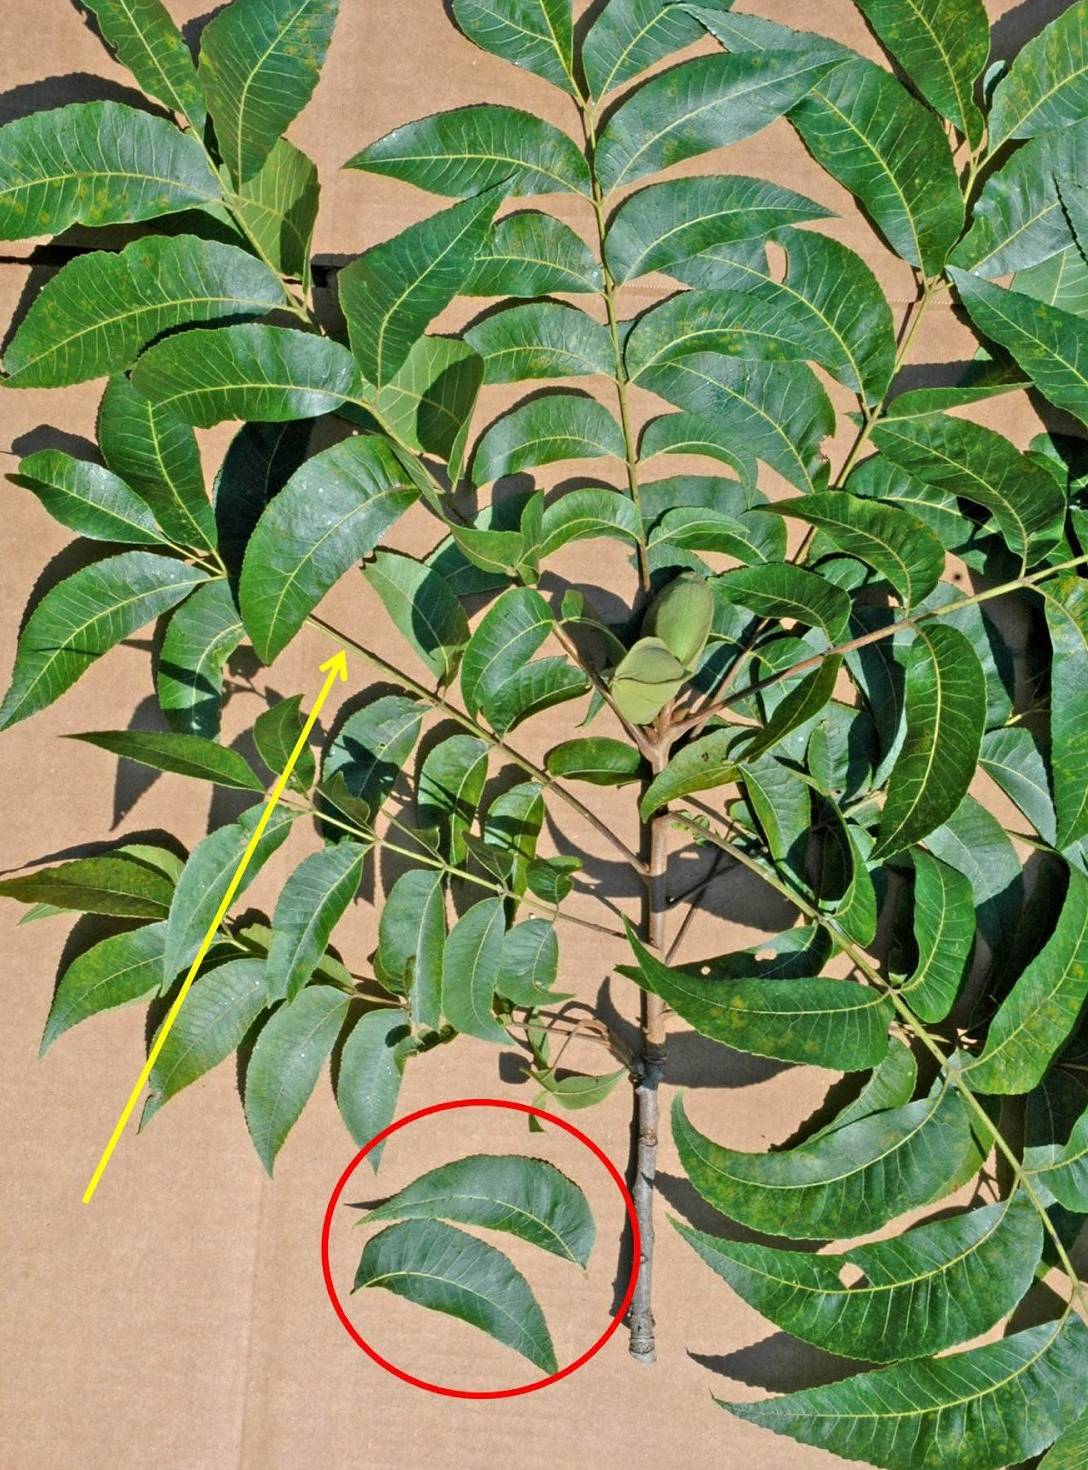 pecan branch with red circle showing how to take samples